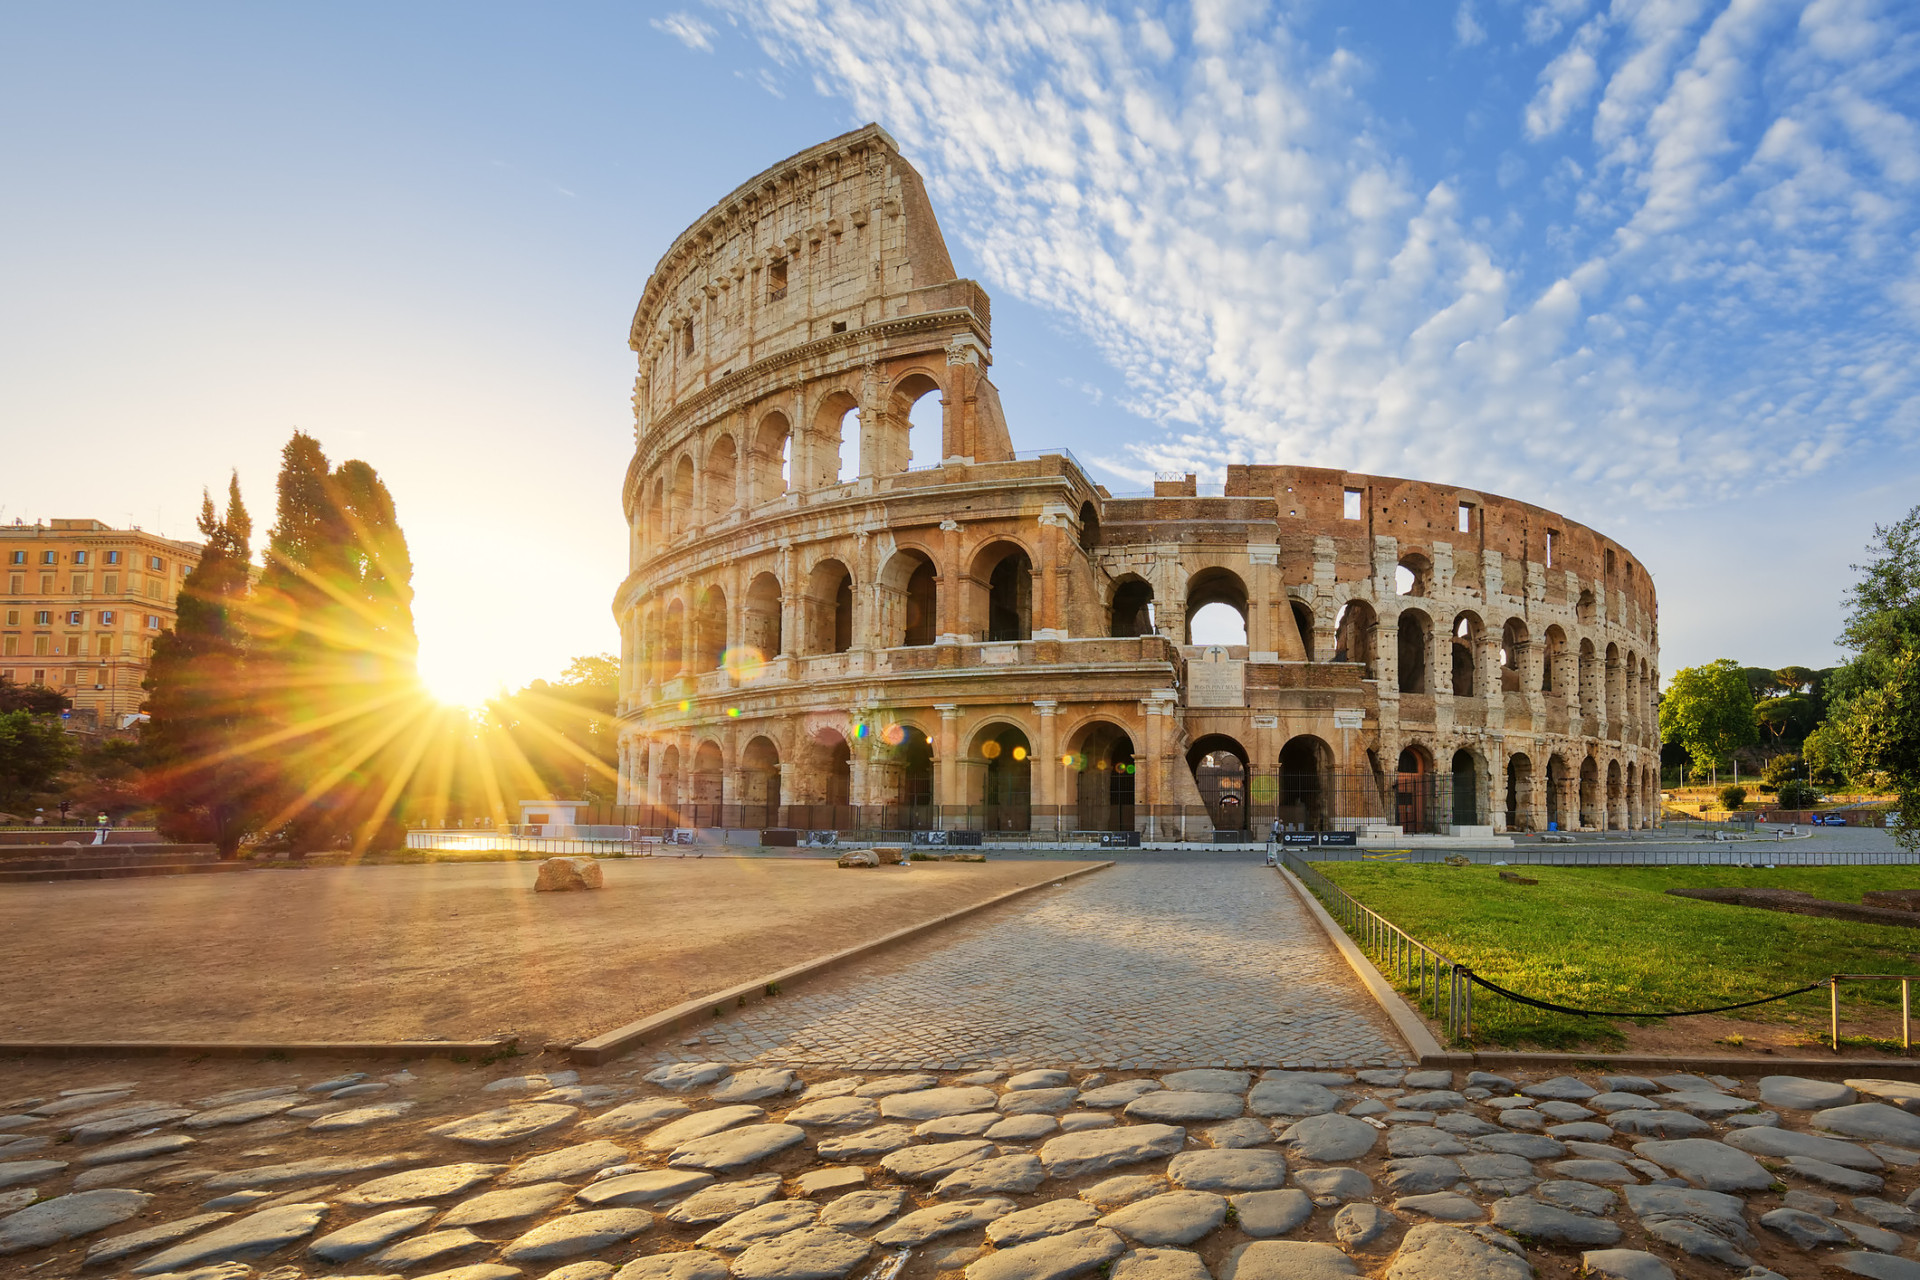 Rome has had a bad reputation among solo travellers in the past. However, that's changing!<p><a href="https://www.msn.com/en-us/community/channel/vid-7xx8mnucu55yw63we9va2gwr7uihbxwc68fxqp25x6tg4ftibpra?cvid=94631541bc0f4f89bfd59158d696ad7e">Follow us and access great exclusive content every day</a></p>